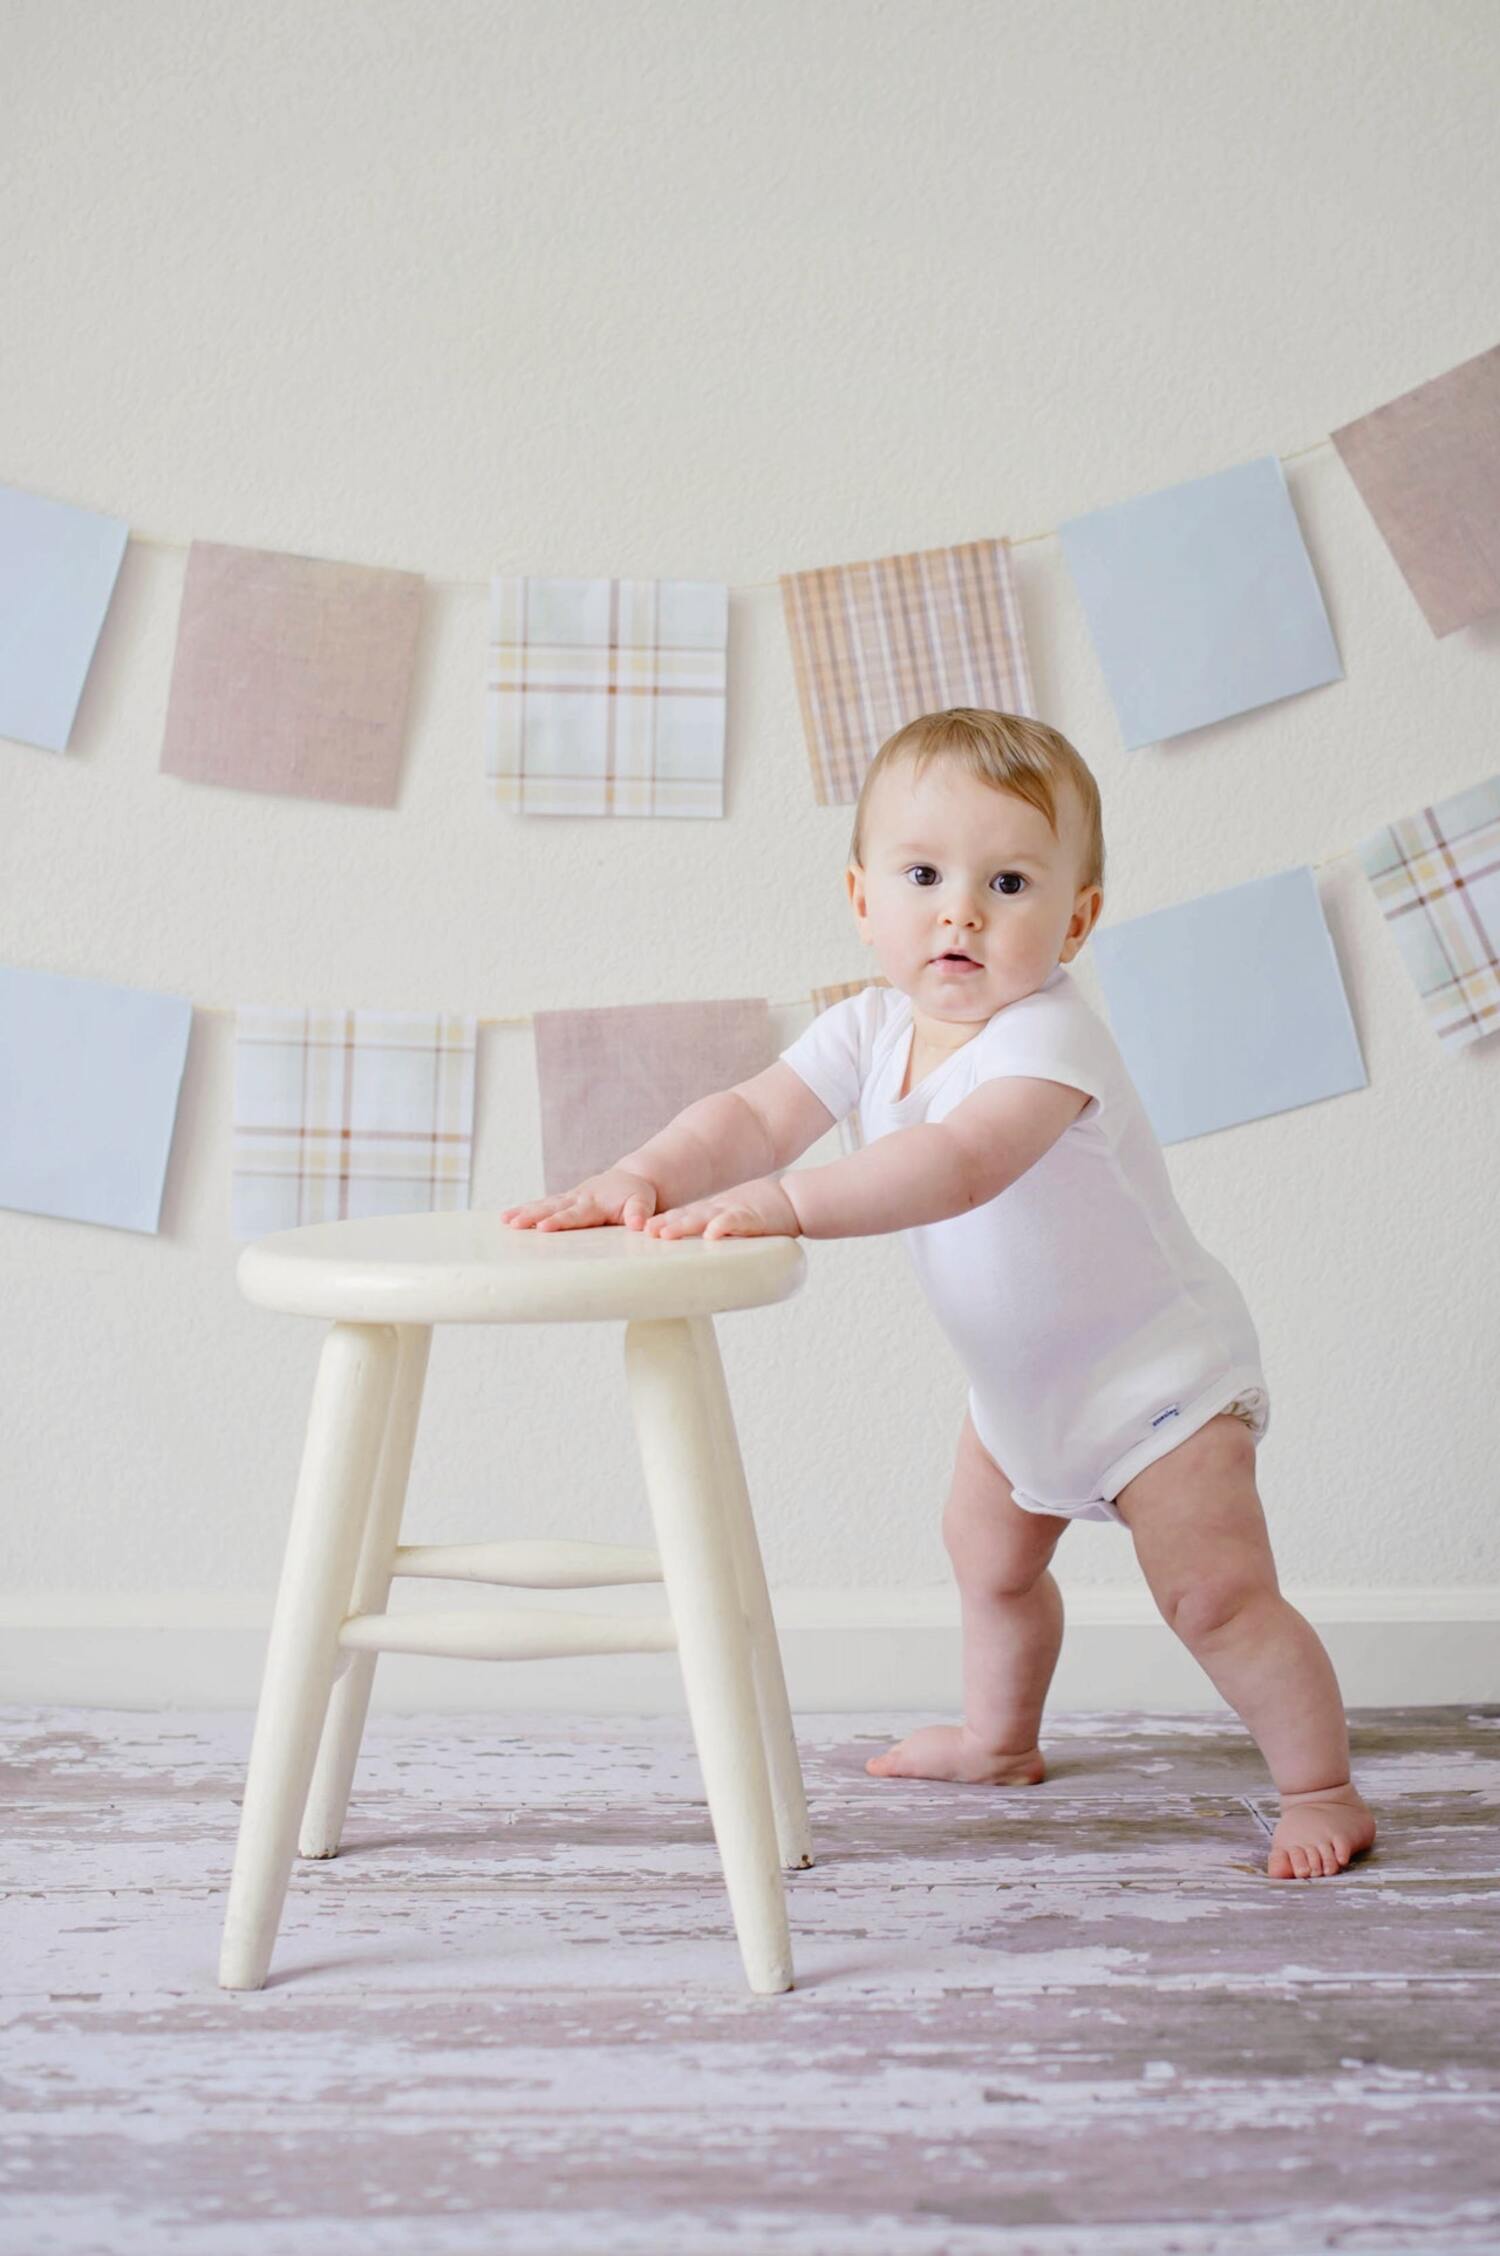 A baby growing and standing near a stool.